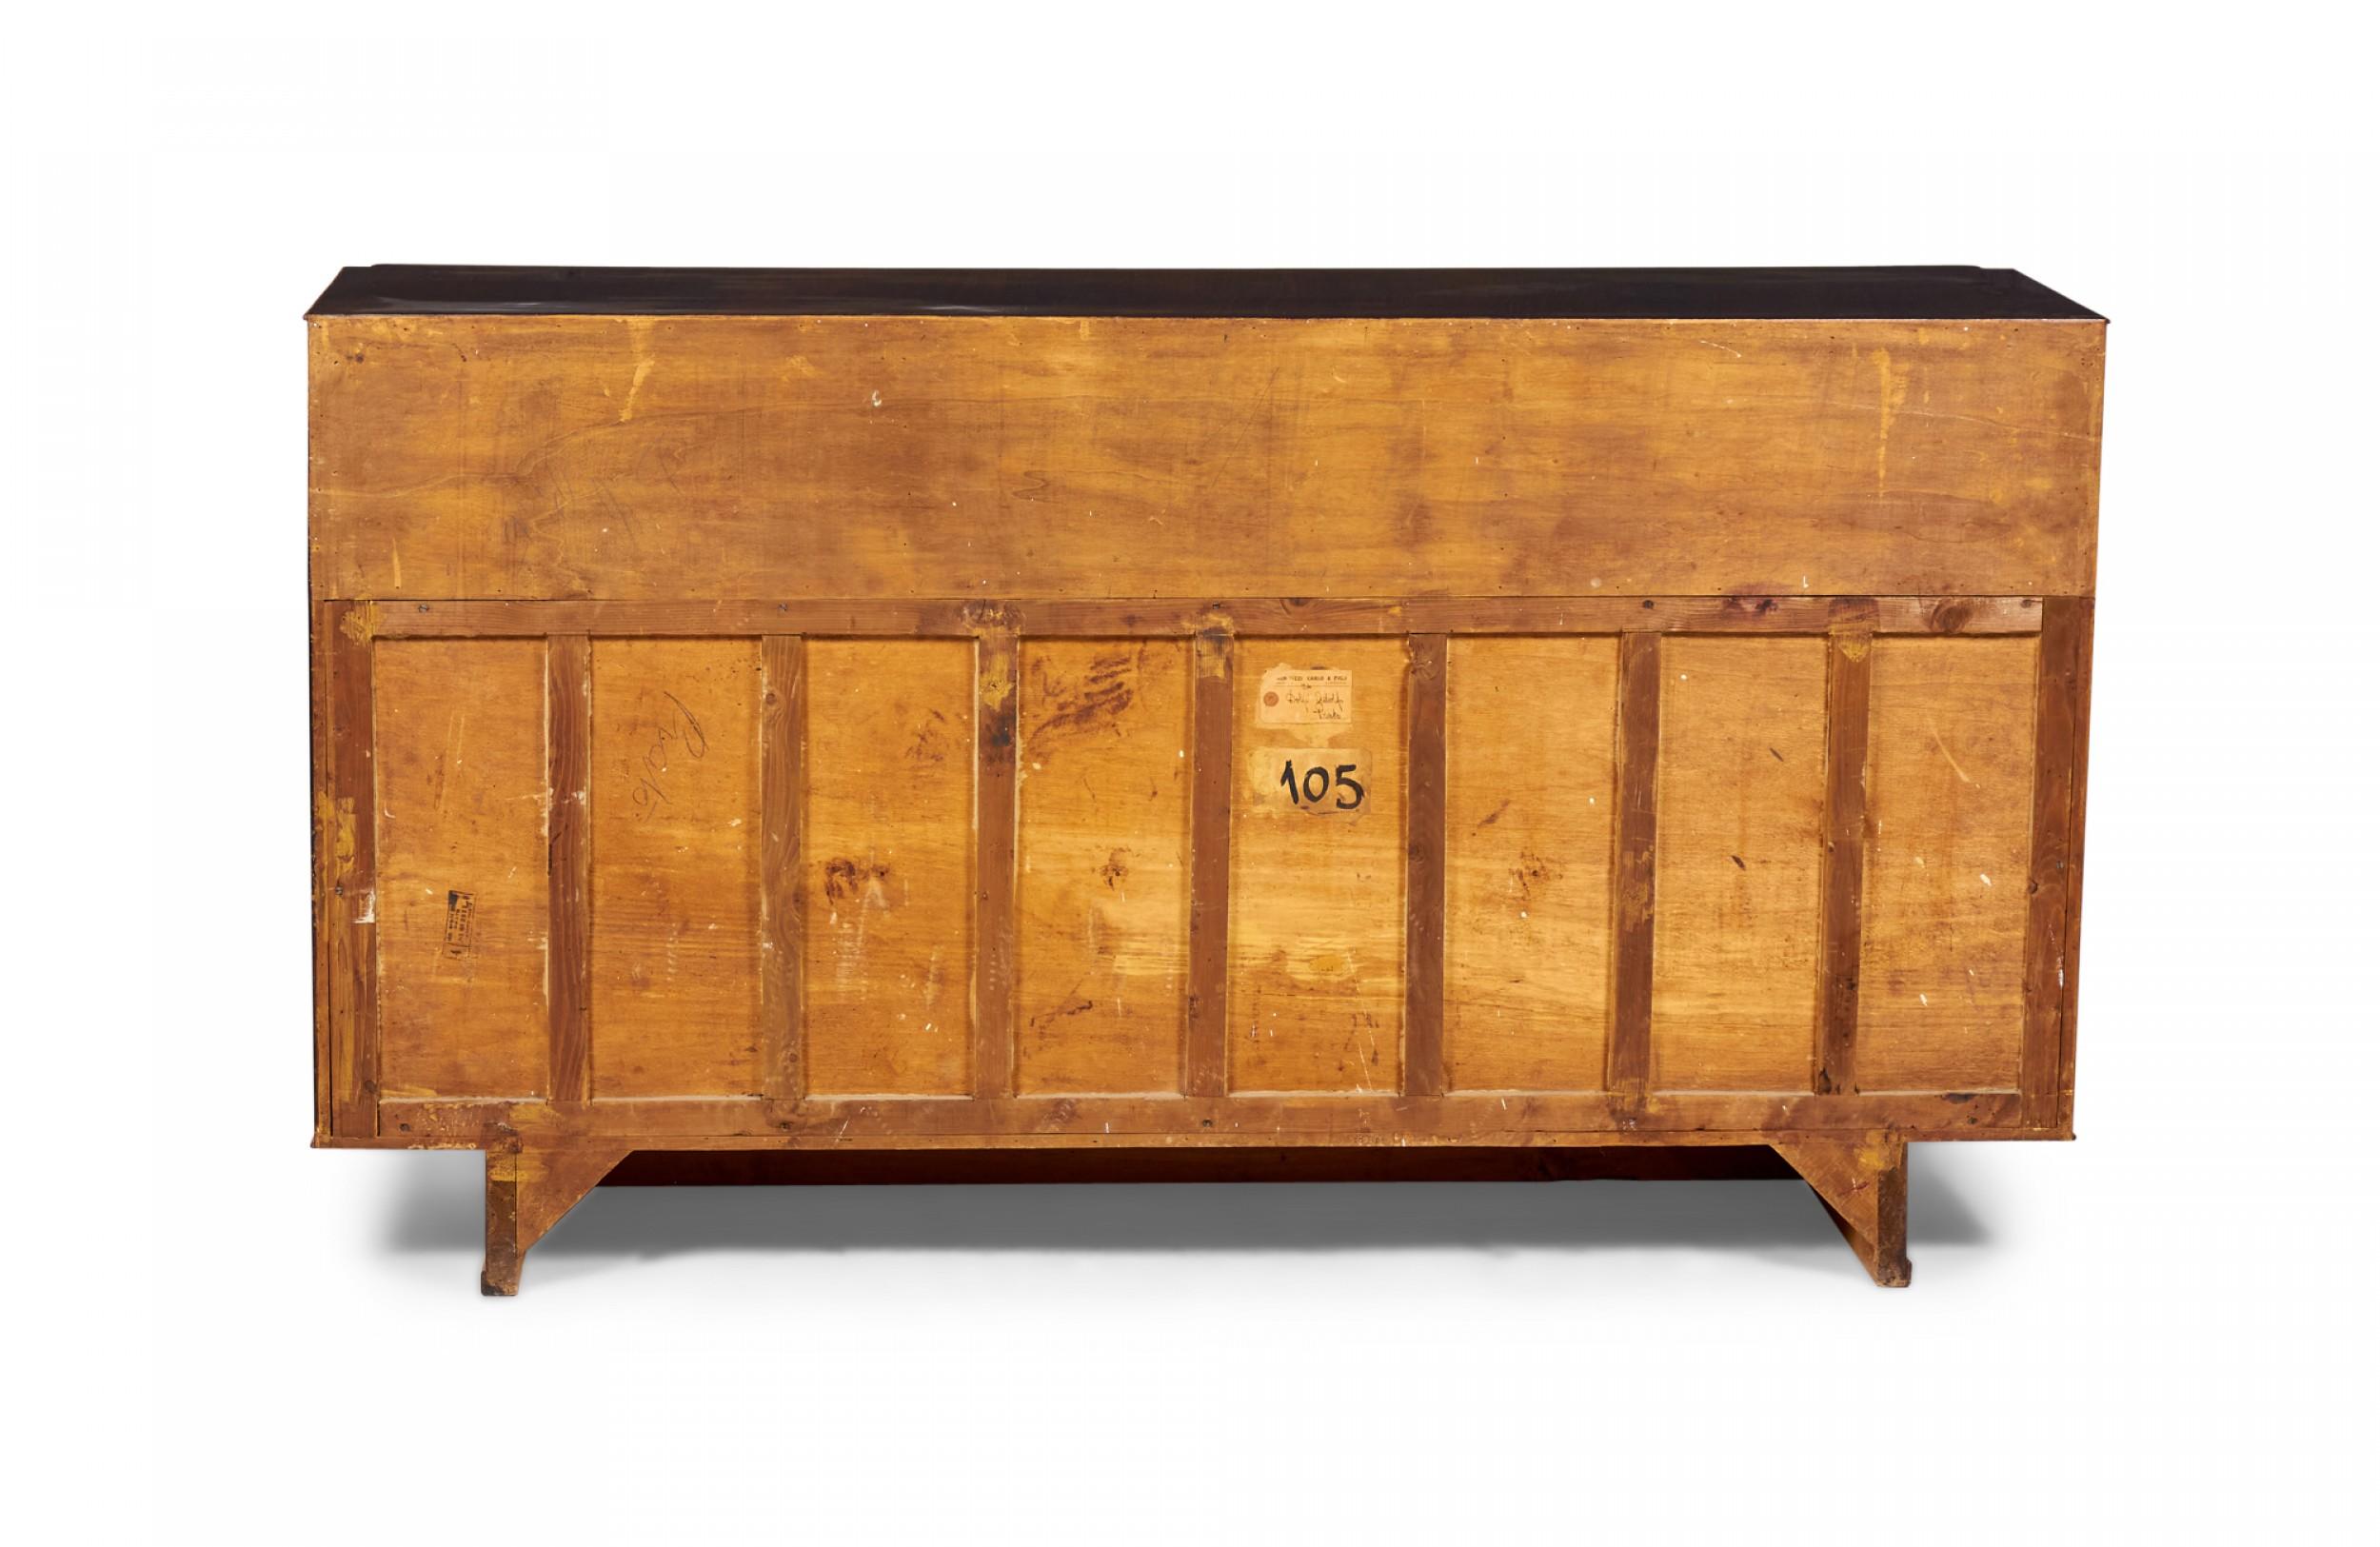 Italian Art Deco Rosewood and Parchment Veneer Credenza 'Manner of Borsani' For Sale 3